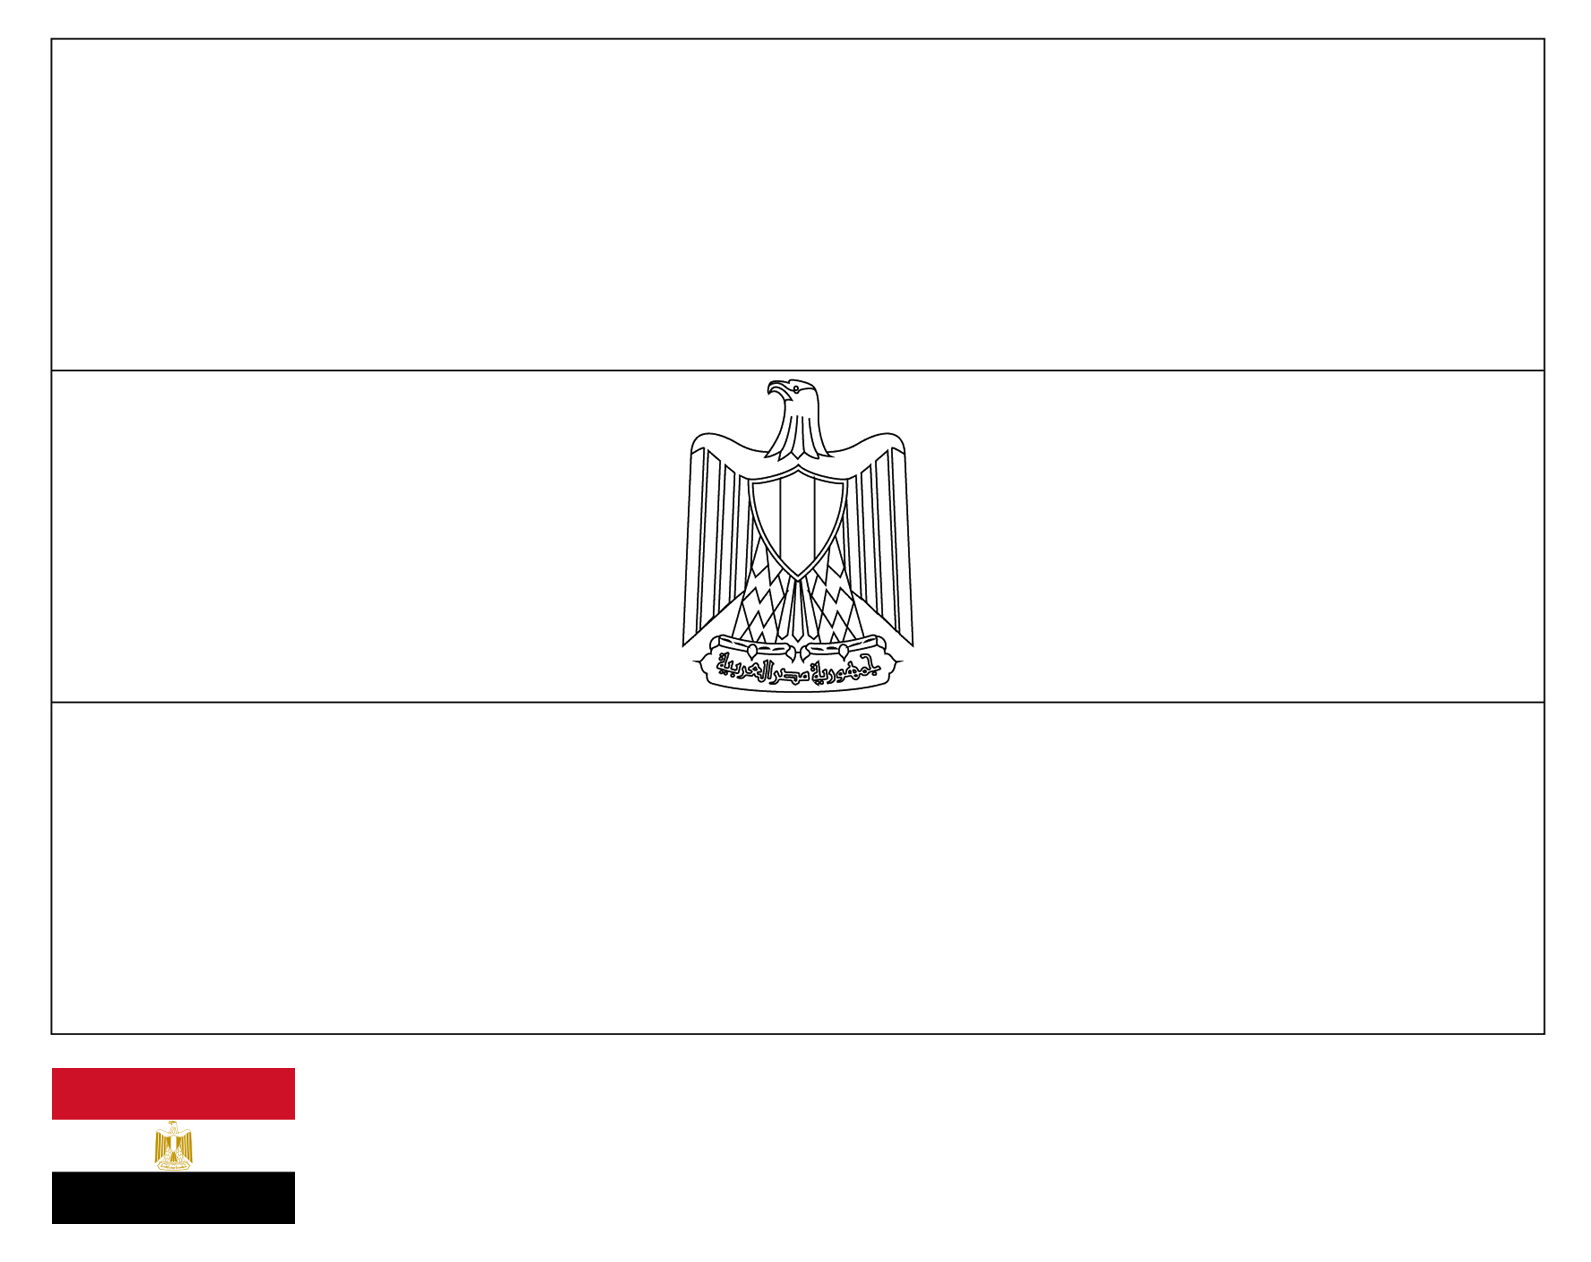 Israel Flag Coloring Page Coloring Page Flag Of Egypt Drawing Outline Vectors Free